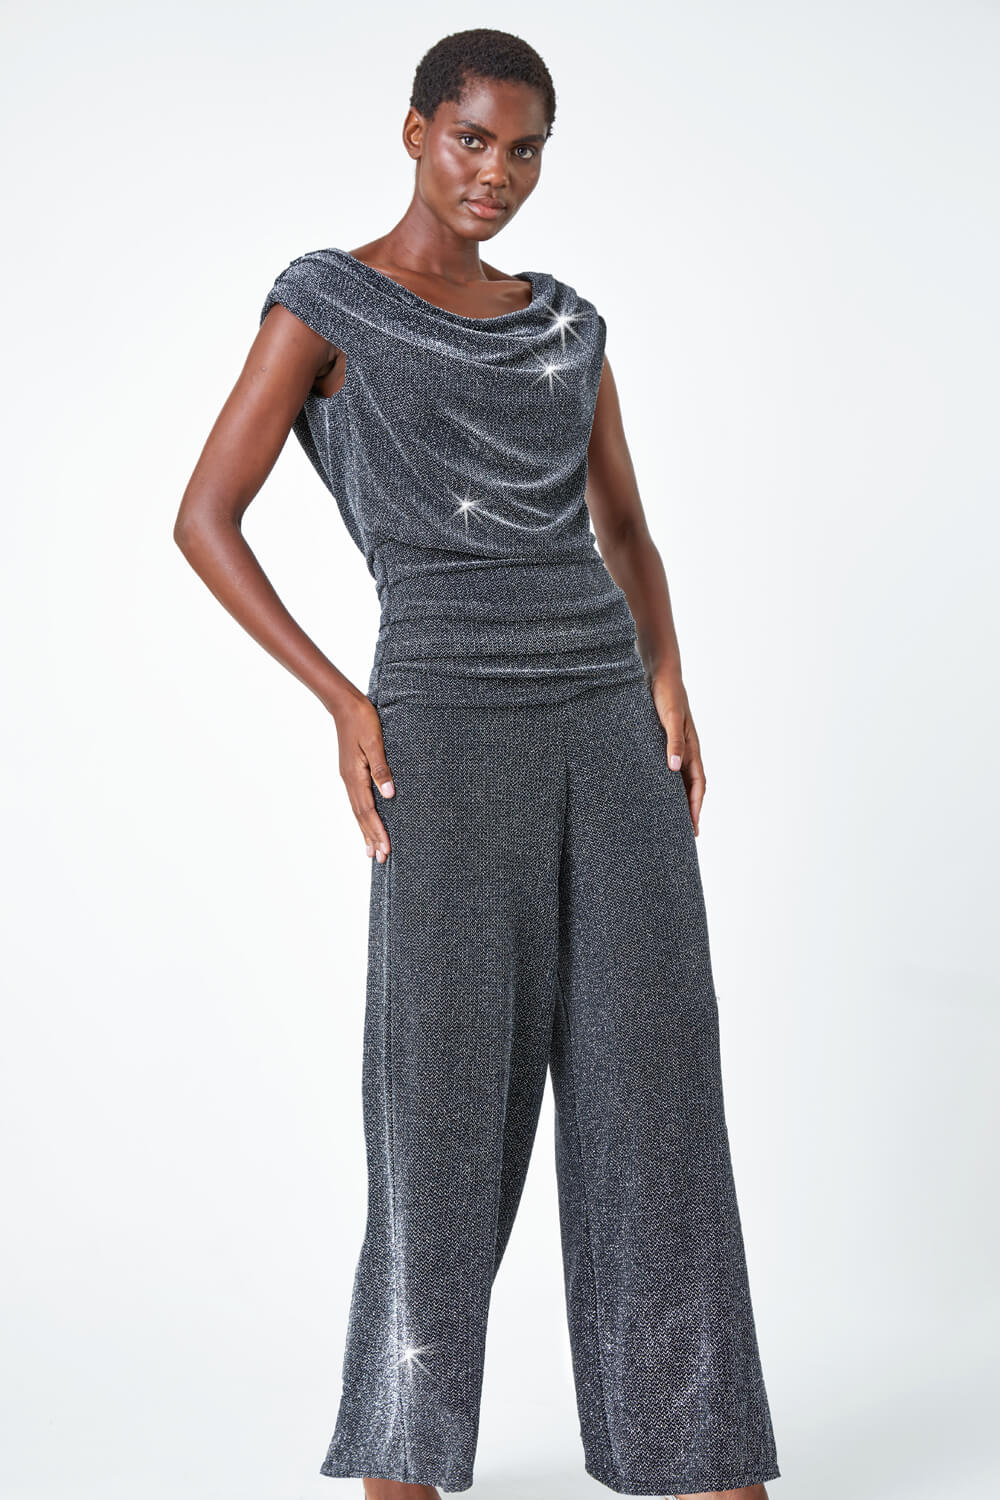 Silver Glitter Cowl Neck Ruched Stretch Jumpsuit, Image 2 of 5